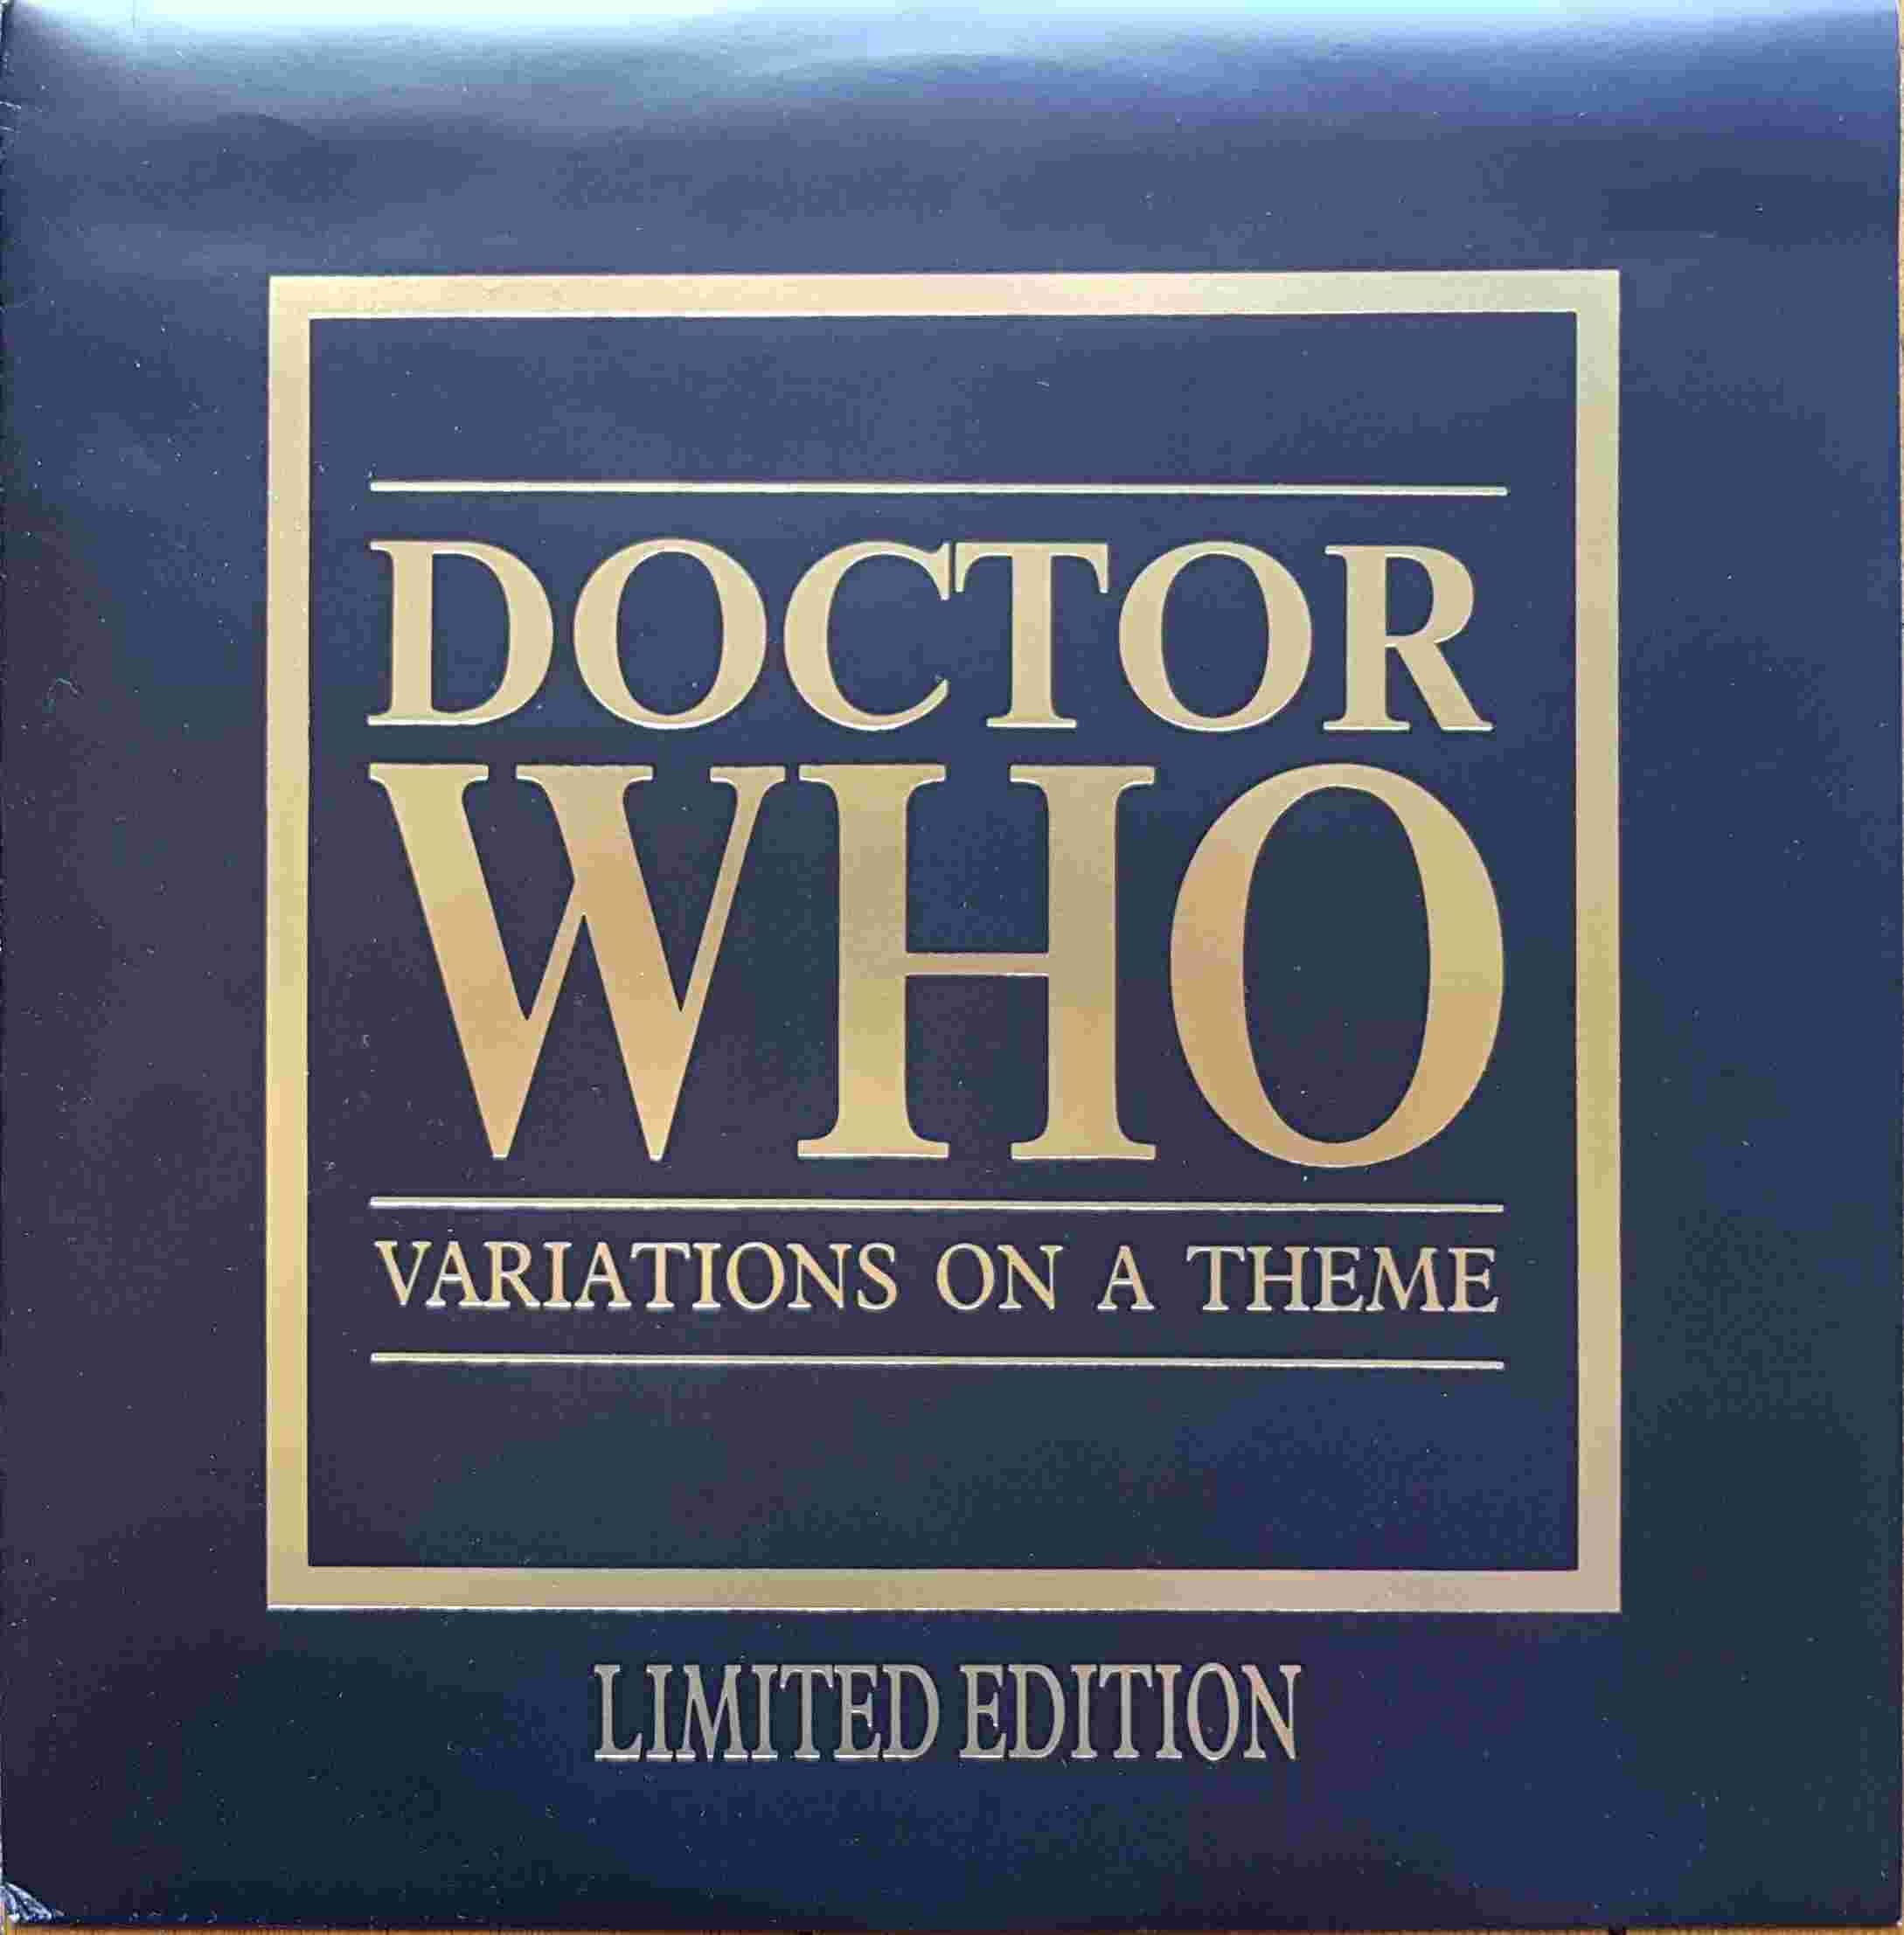 Picture of 12X MMI-4 Doctor Who - Variations on a theme - Limited edition by artist Ron Grainer from the BBC 12inches - Records and Tapes library